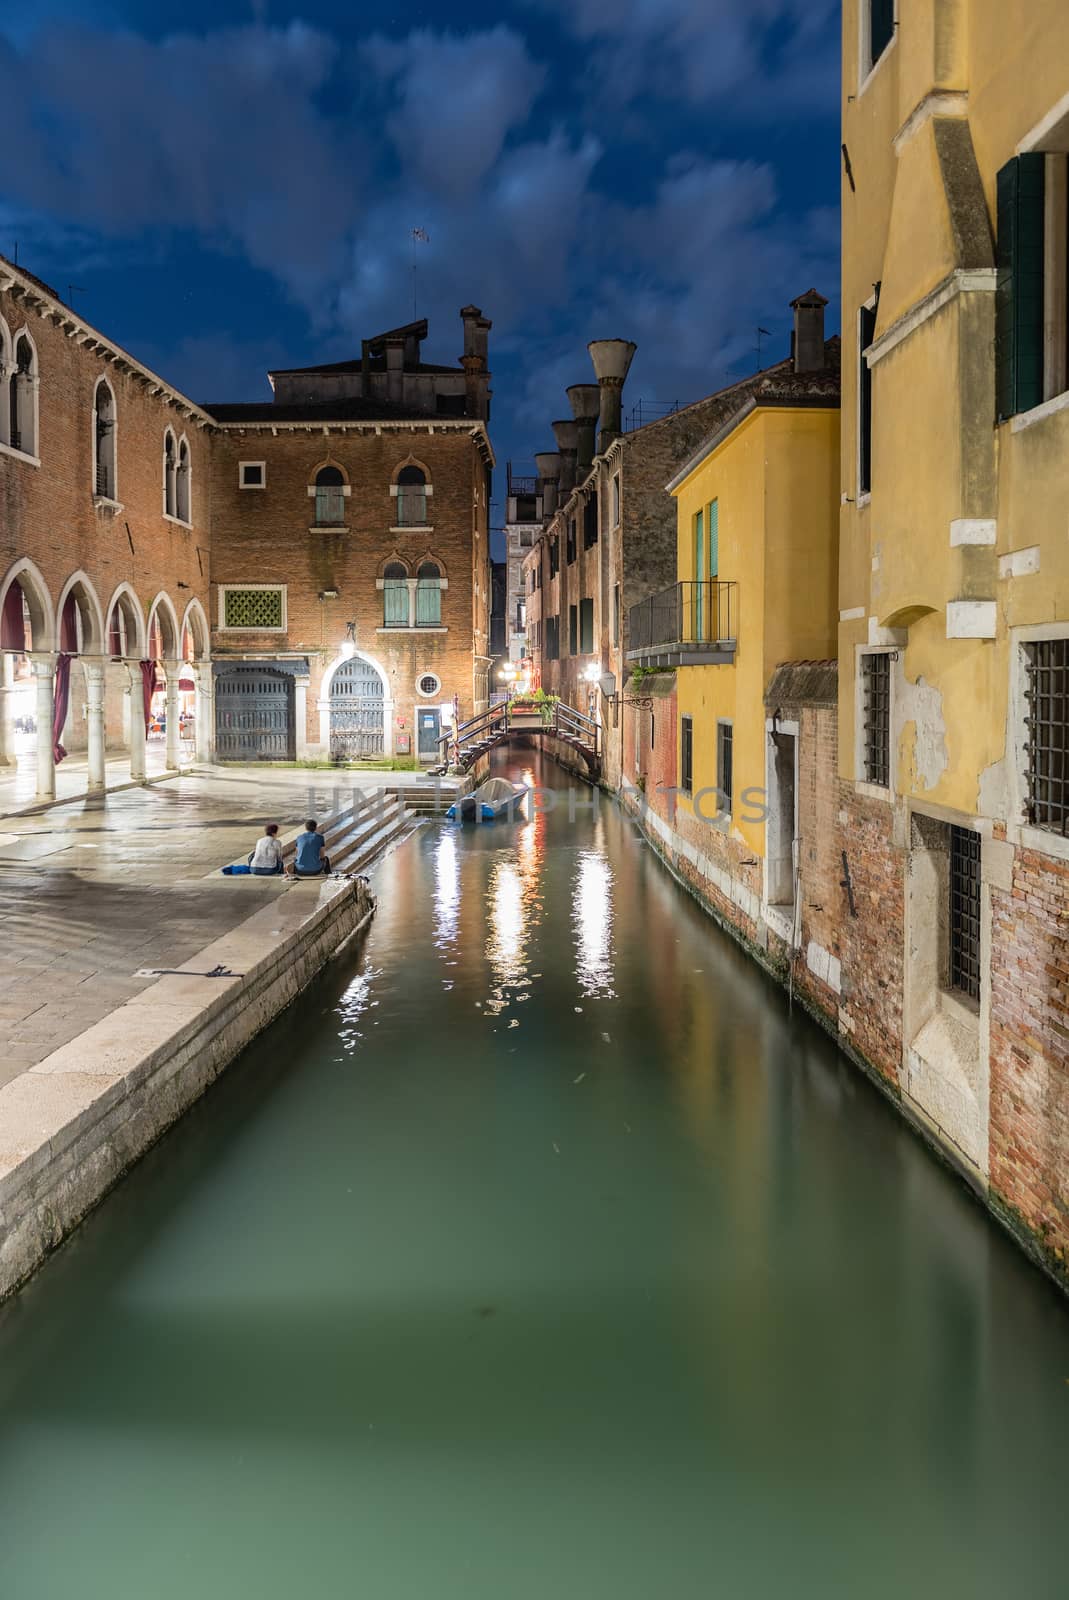 View over a picturesque canal and little bridge at night in San Polo district of Venice, Italy